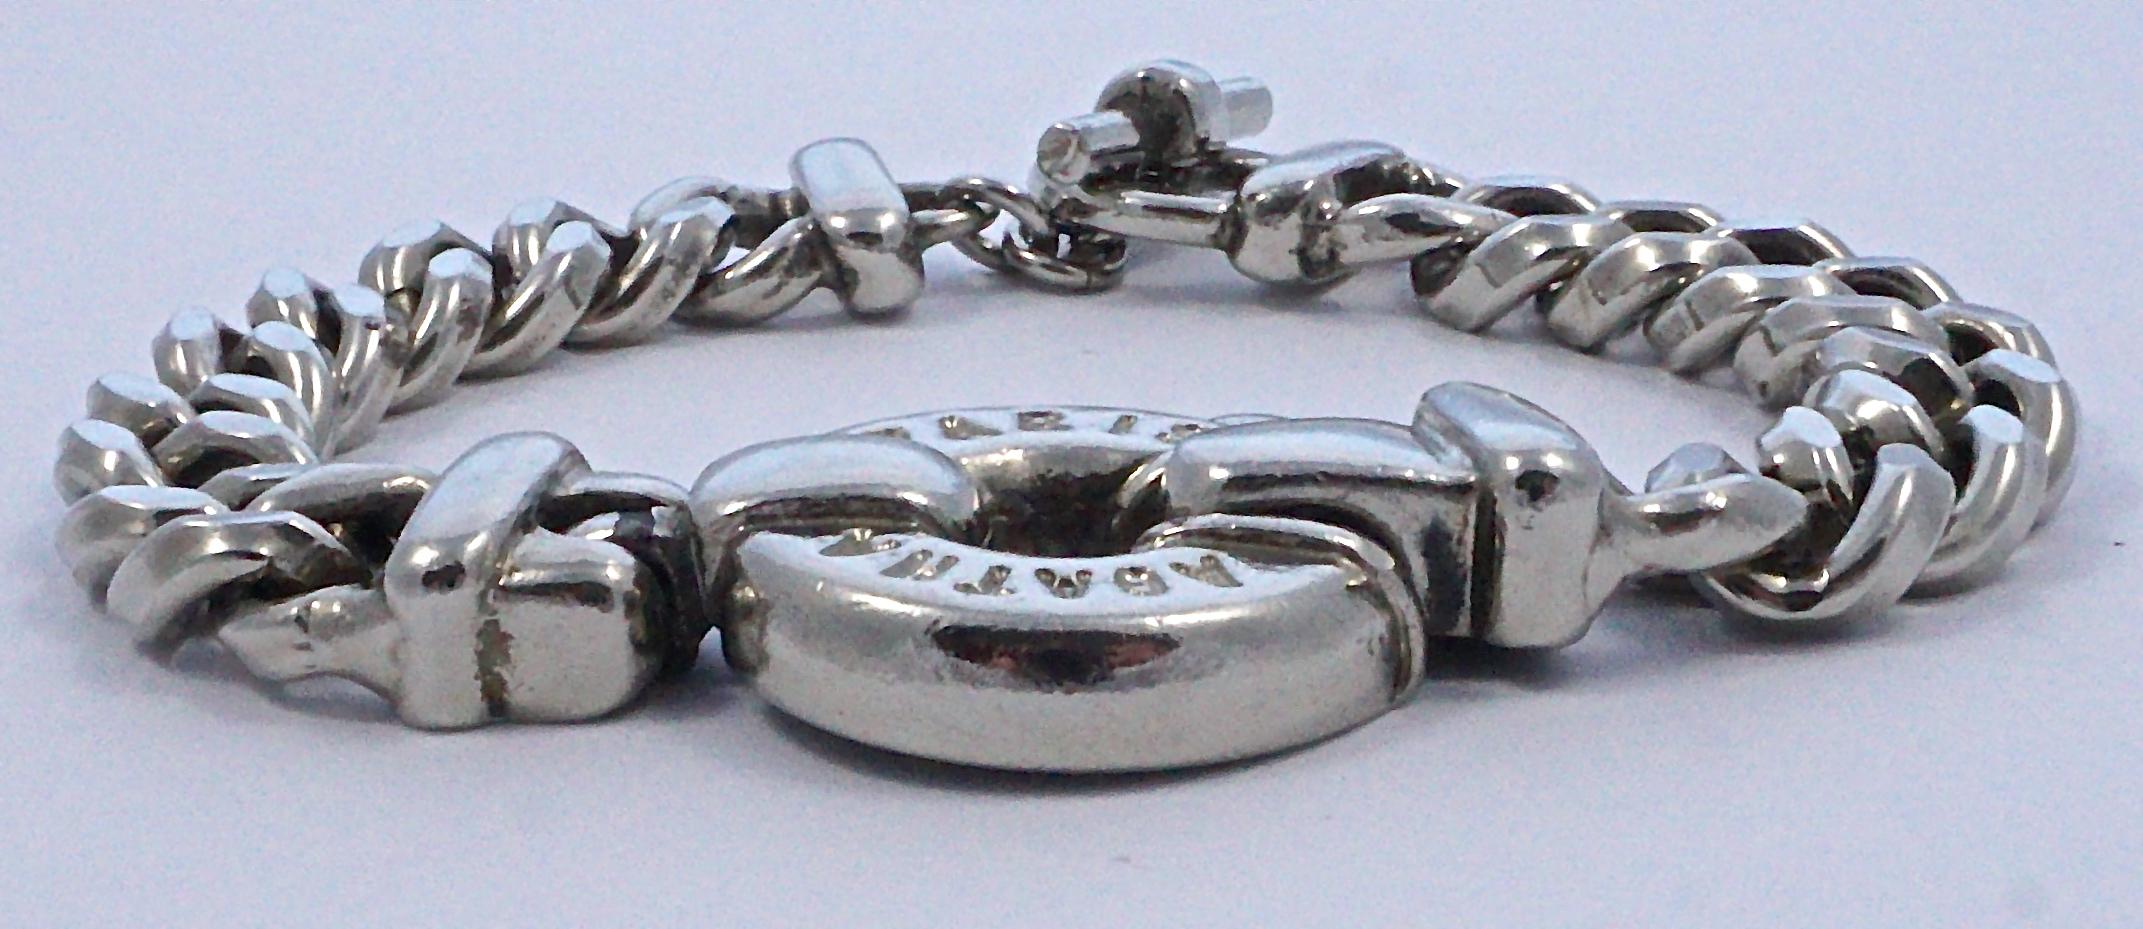 Agatha Paris fashionable silver tone curb link chain bracelet, featuring a chunky round centre medallion stamped Agatha Paris, and a toggle clasp. Measuring length 20.5cm / 8.07 inches by width 1cm / .39 inch, and the medallion is diameter 2.5cm /